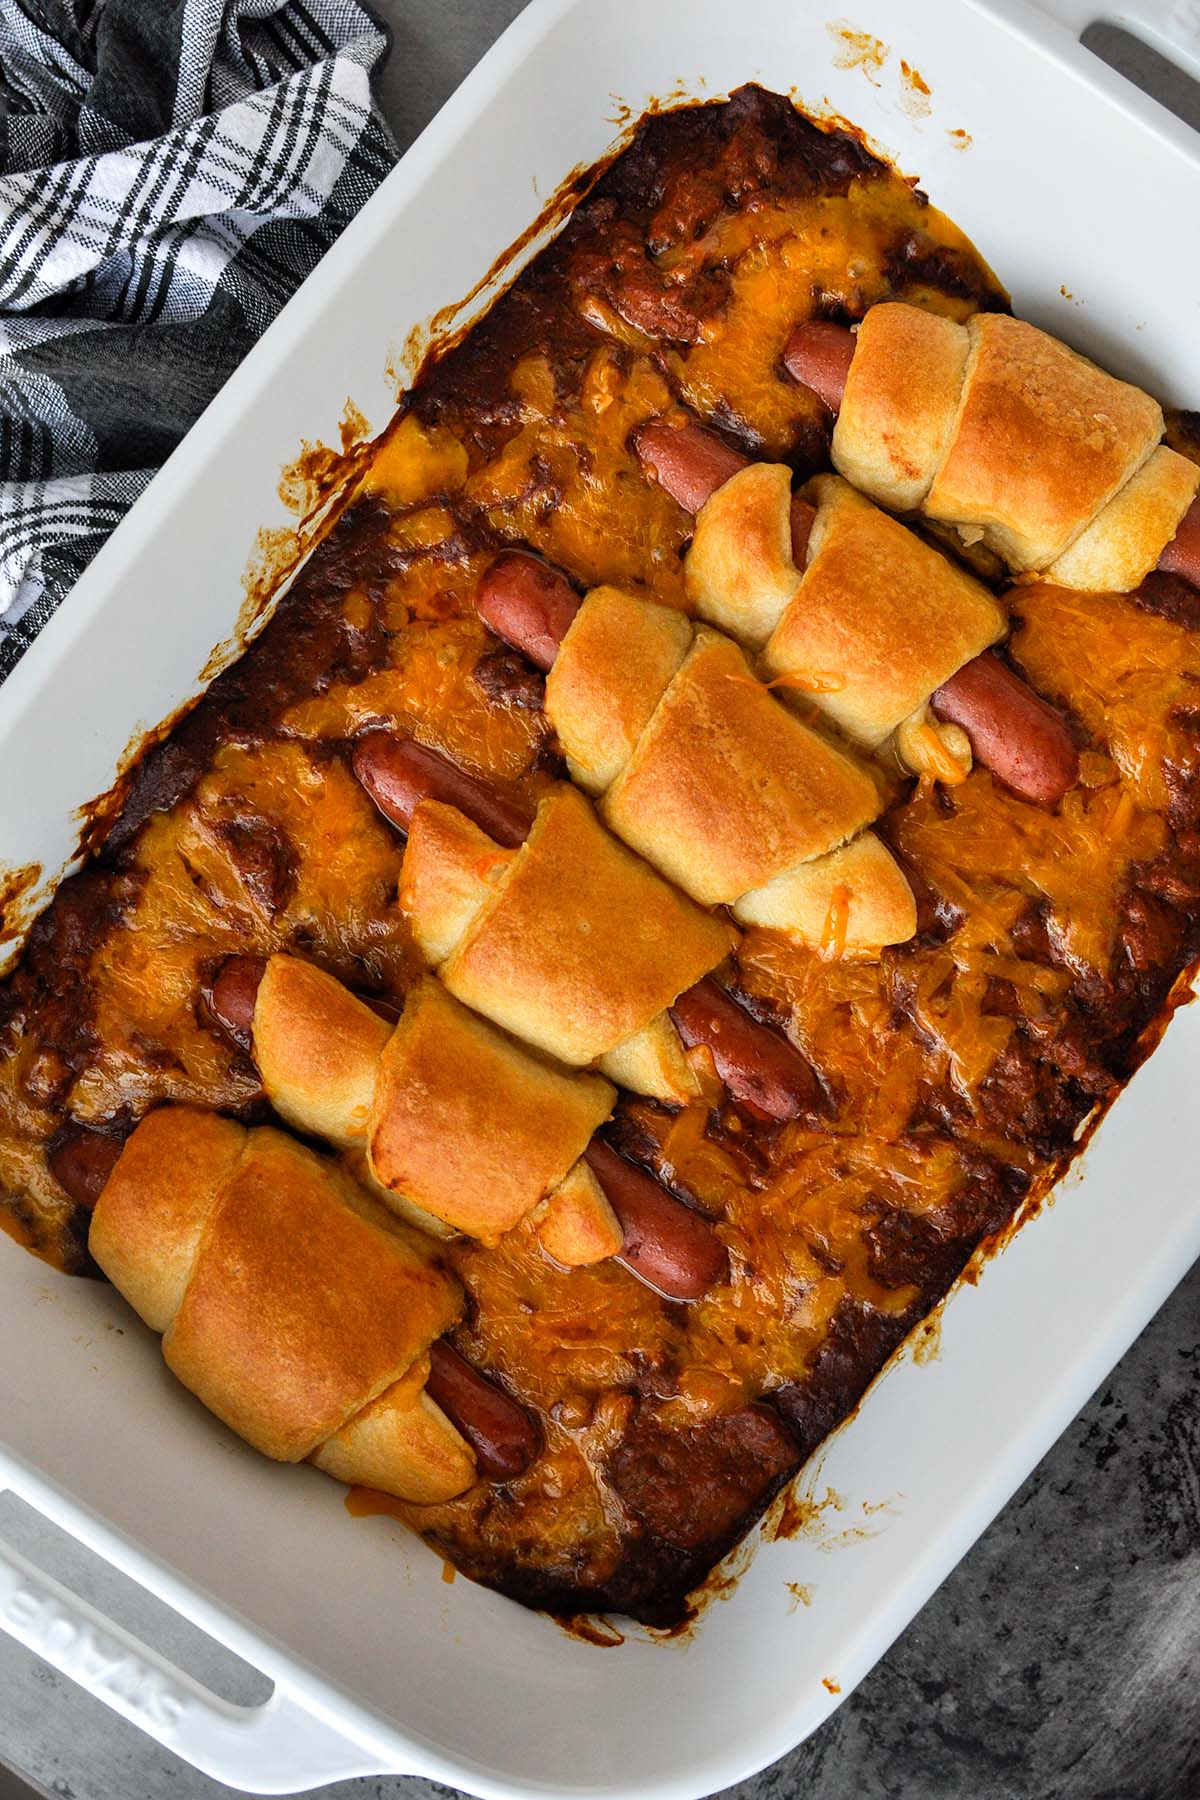 A whole baking dish of hot dog casserole with a small bowl of cheese and a black and white towel.